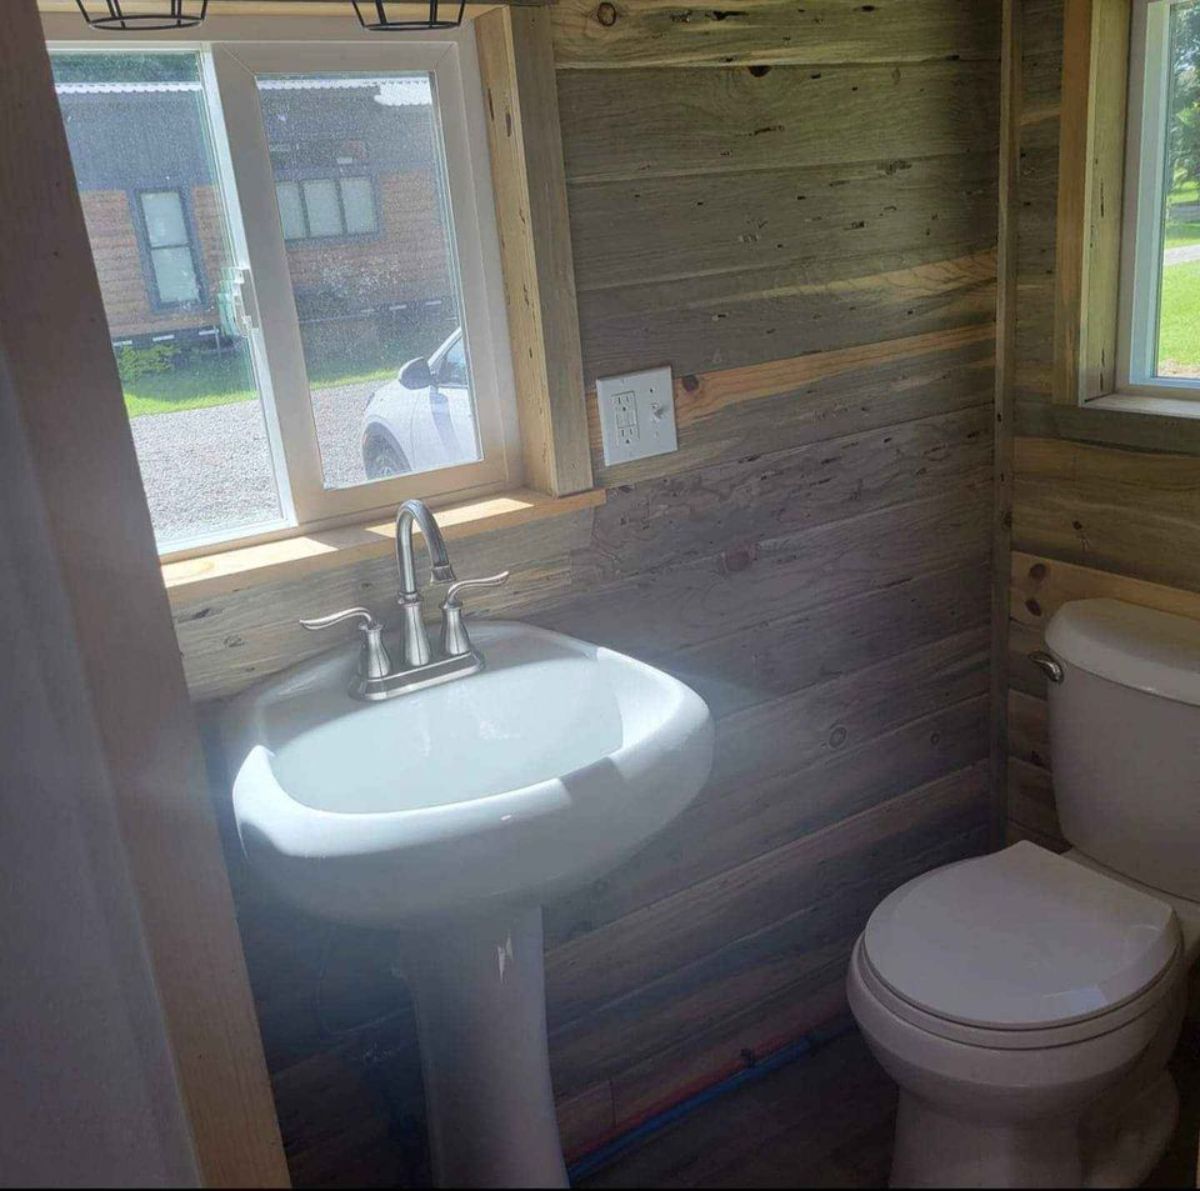 Standard toilet and sink in bathroom of 20’ tiny house with two lofts